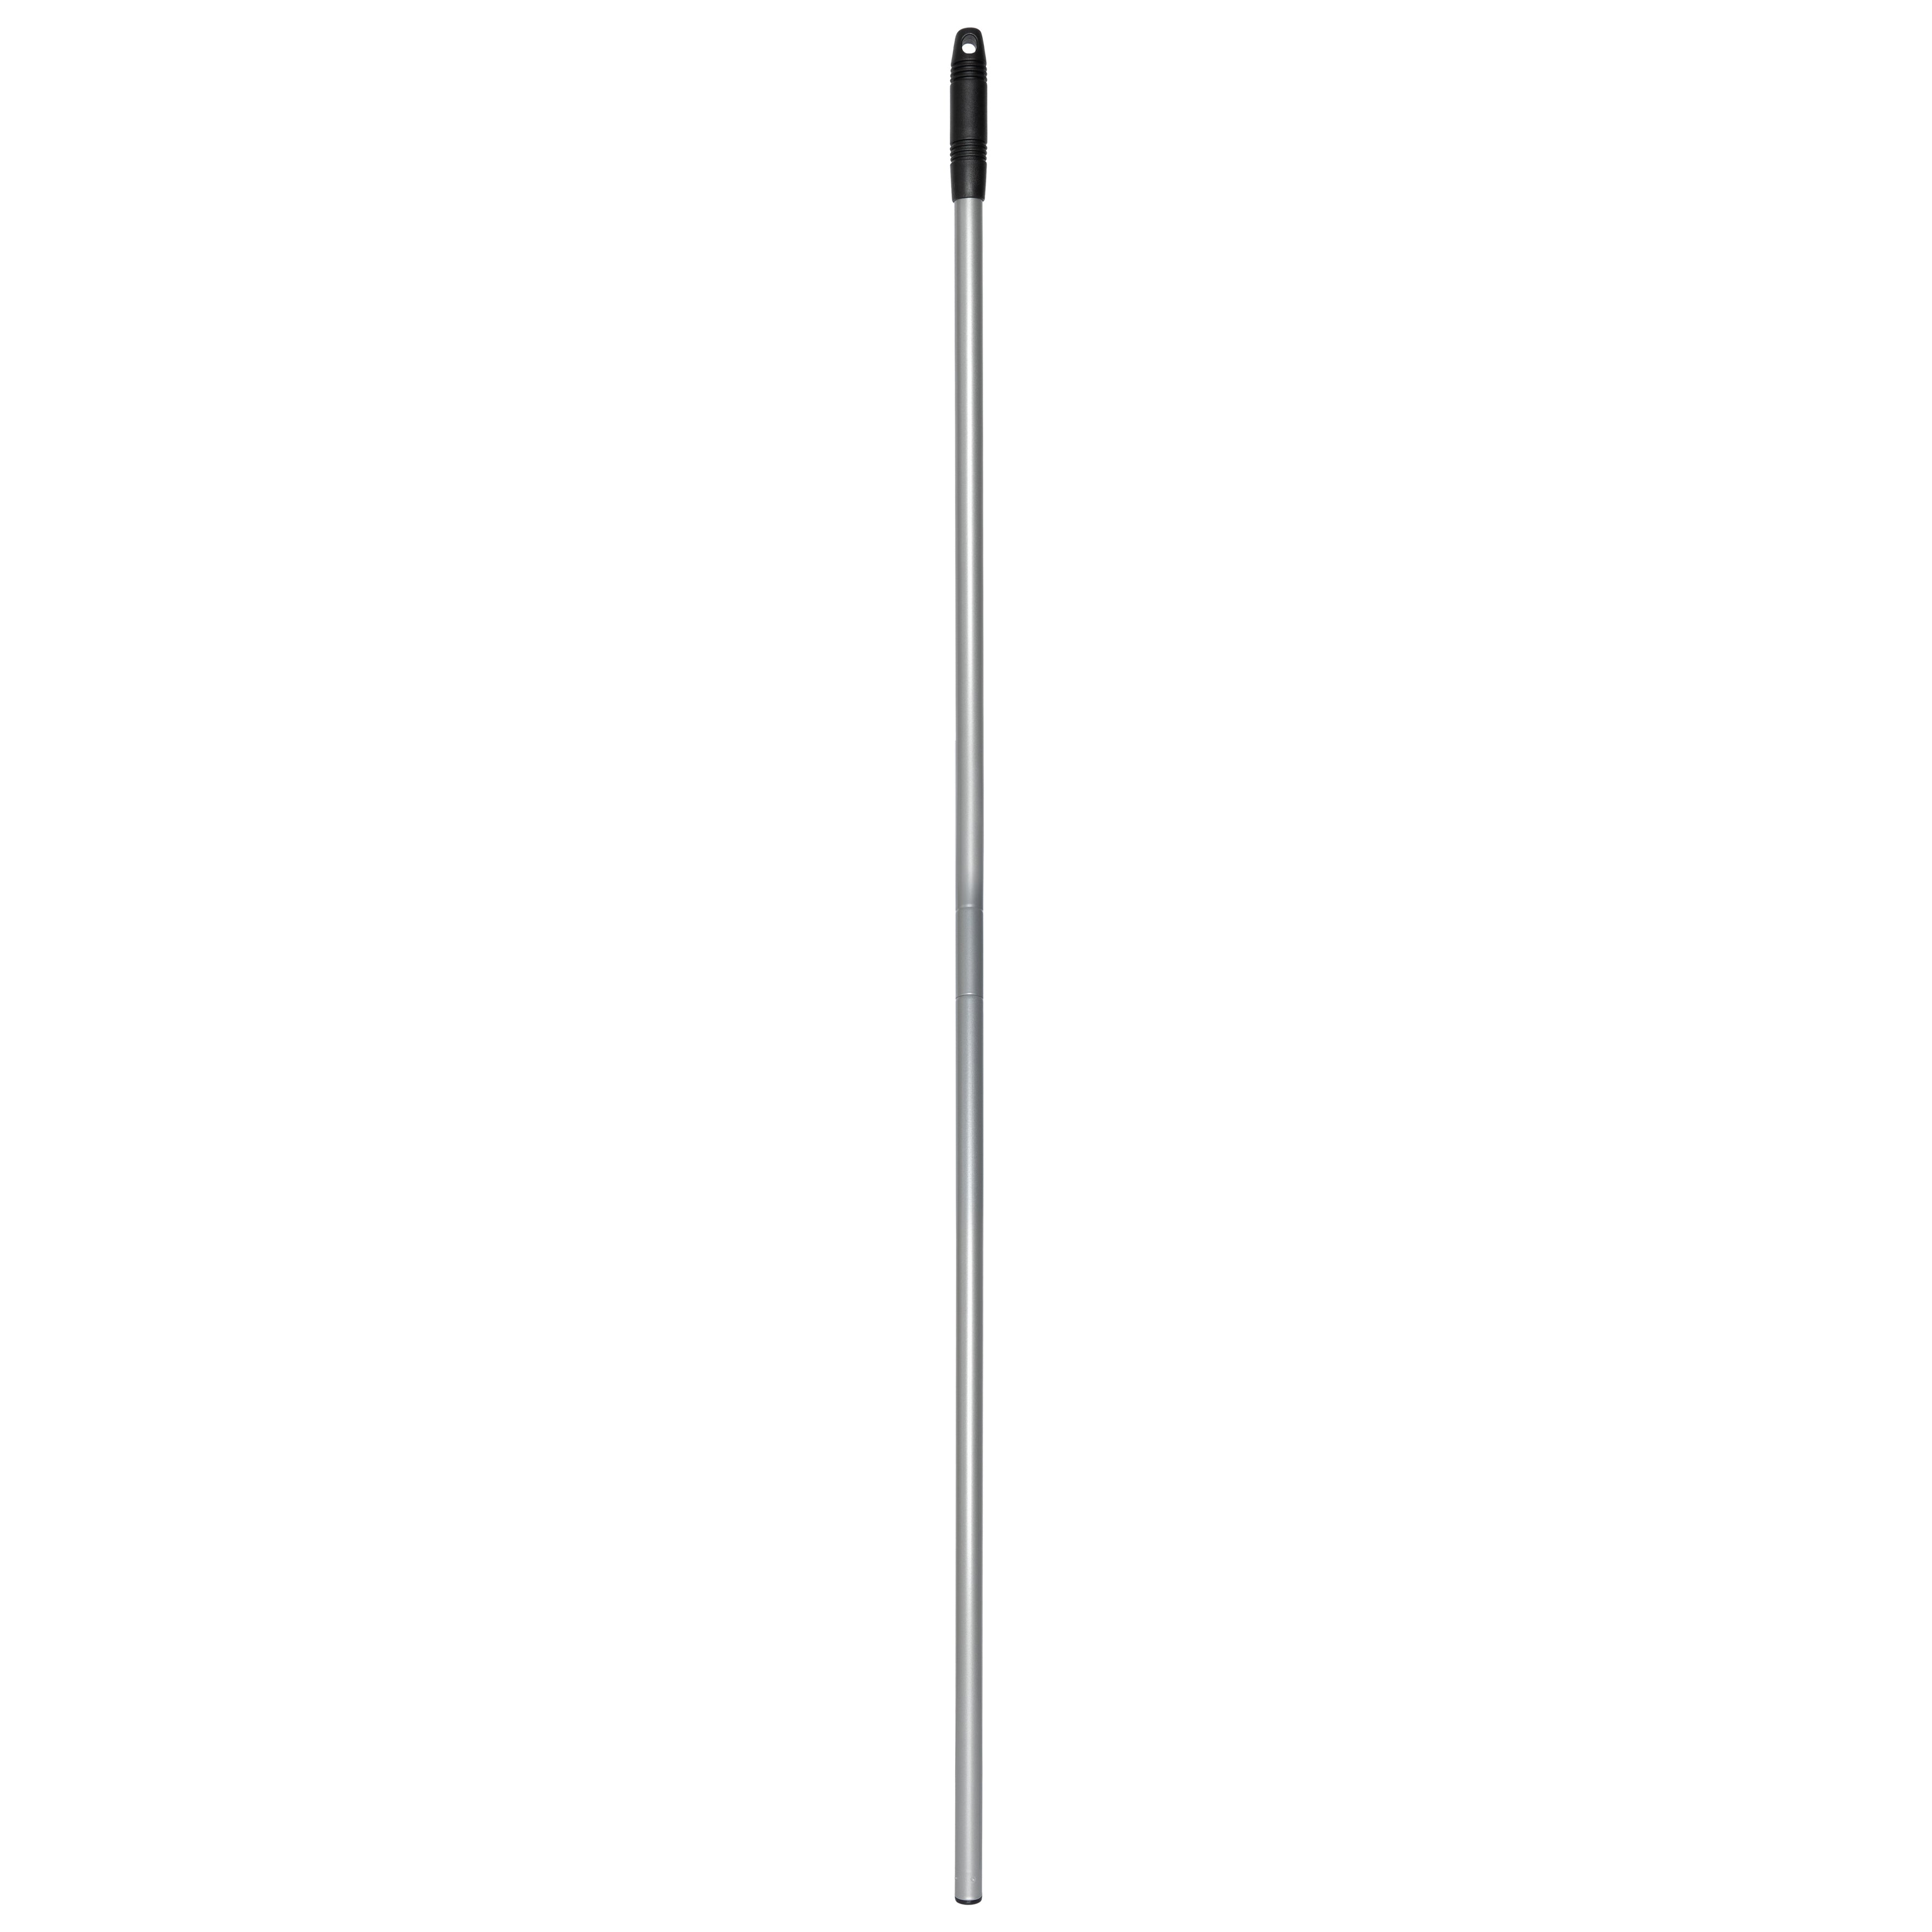 48" long Silver Handle Replacement For Slender Broom